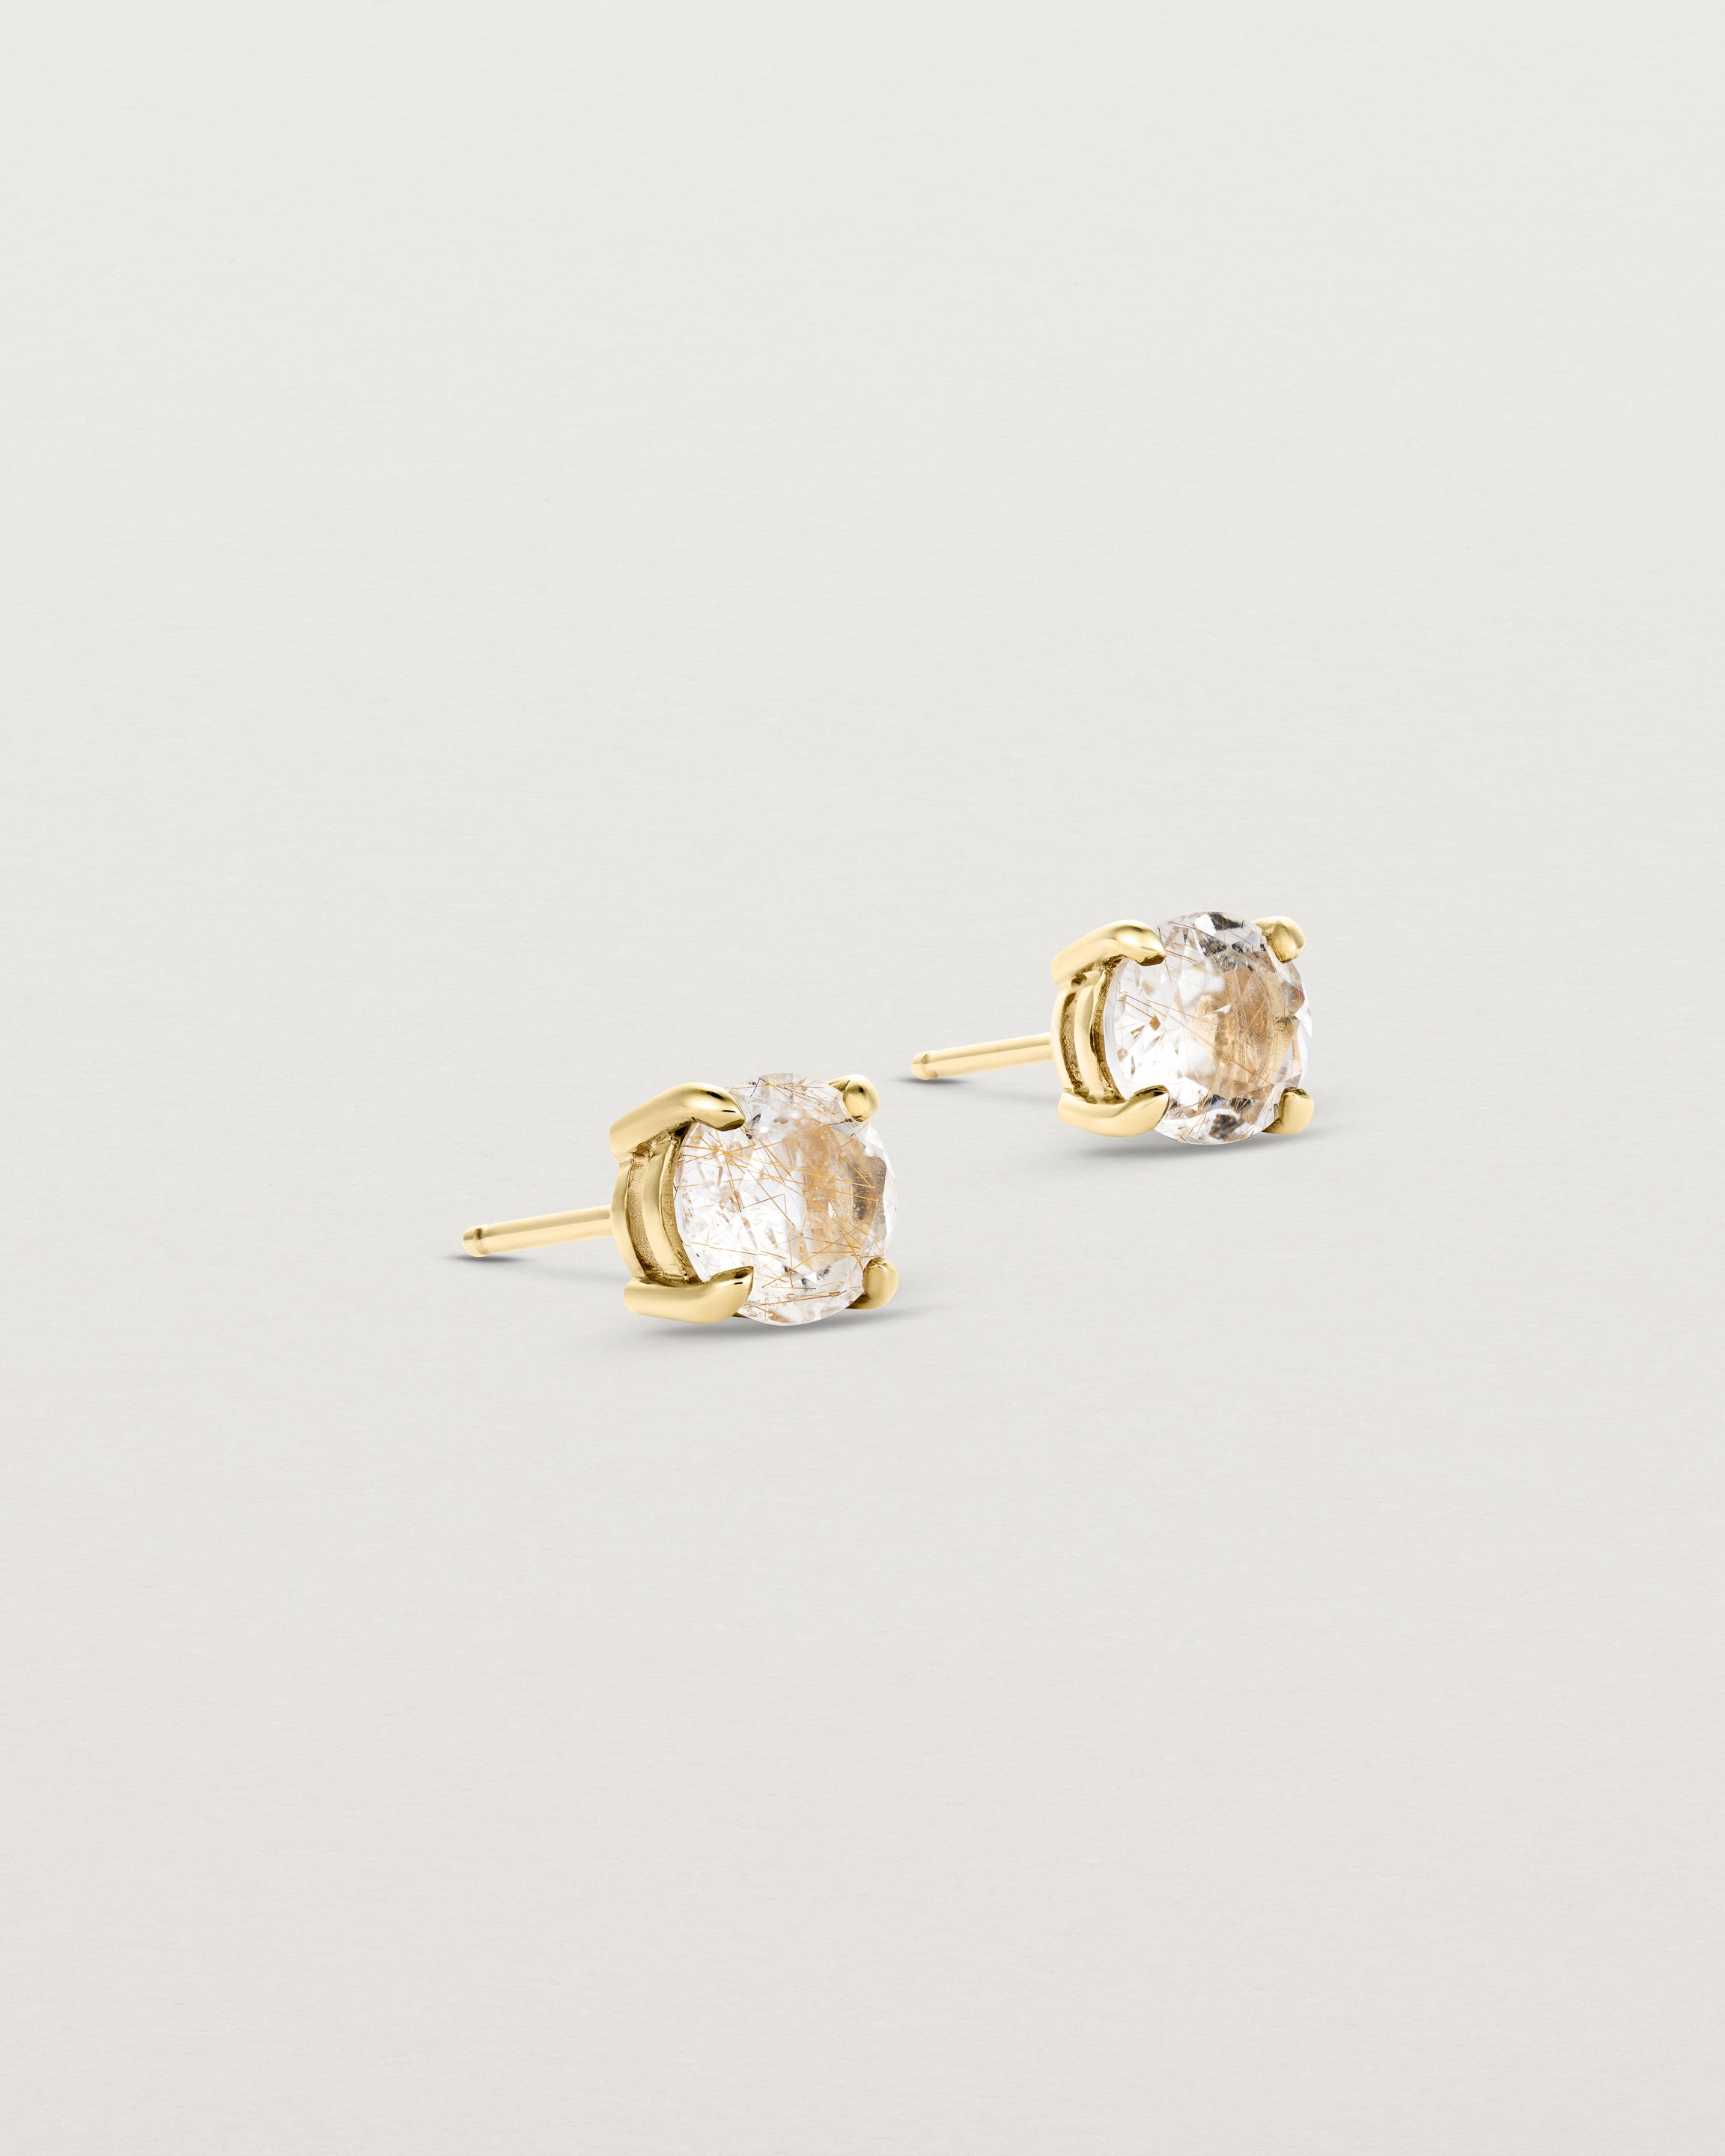 A pair of yellow gold studs featuring a round cut light yellow rutilated quartz stone